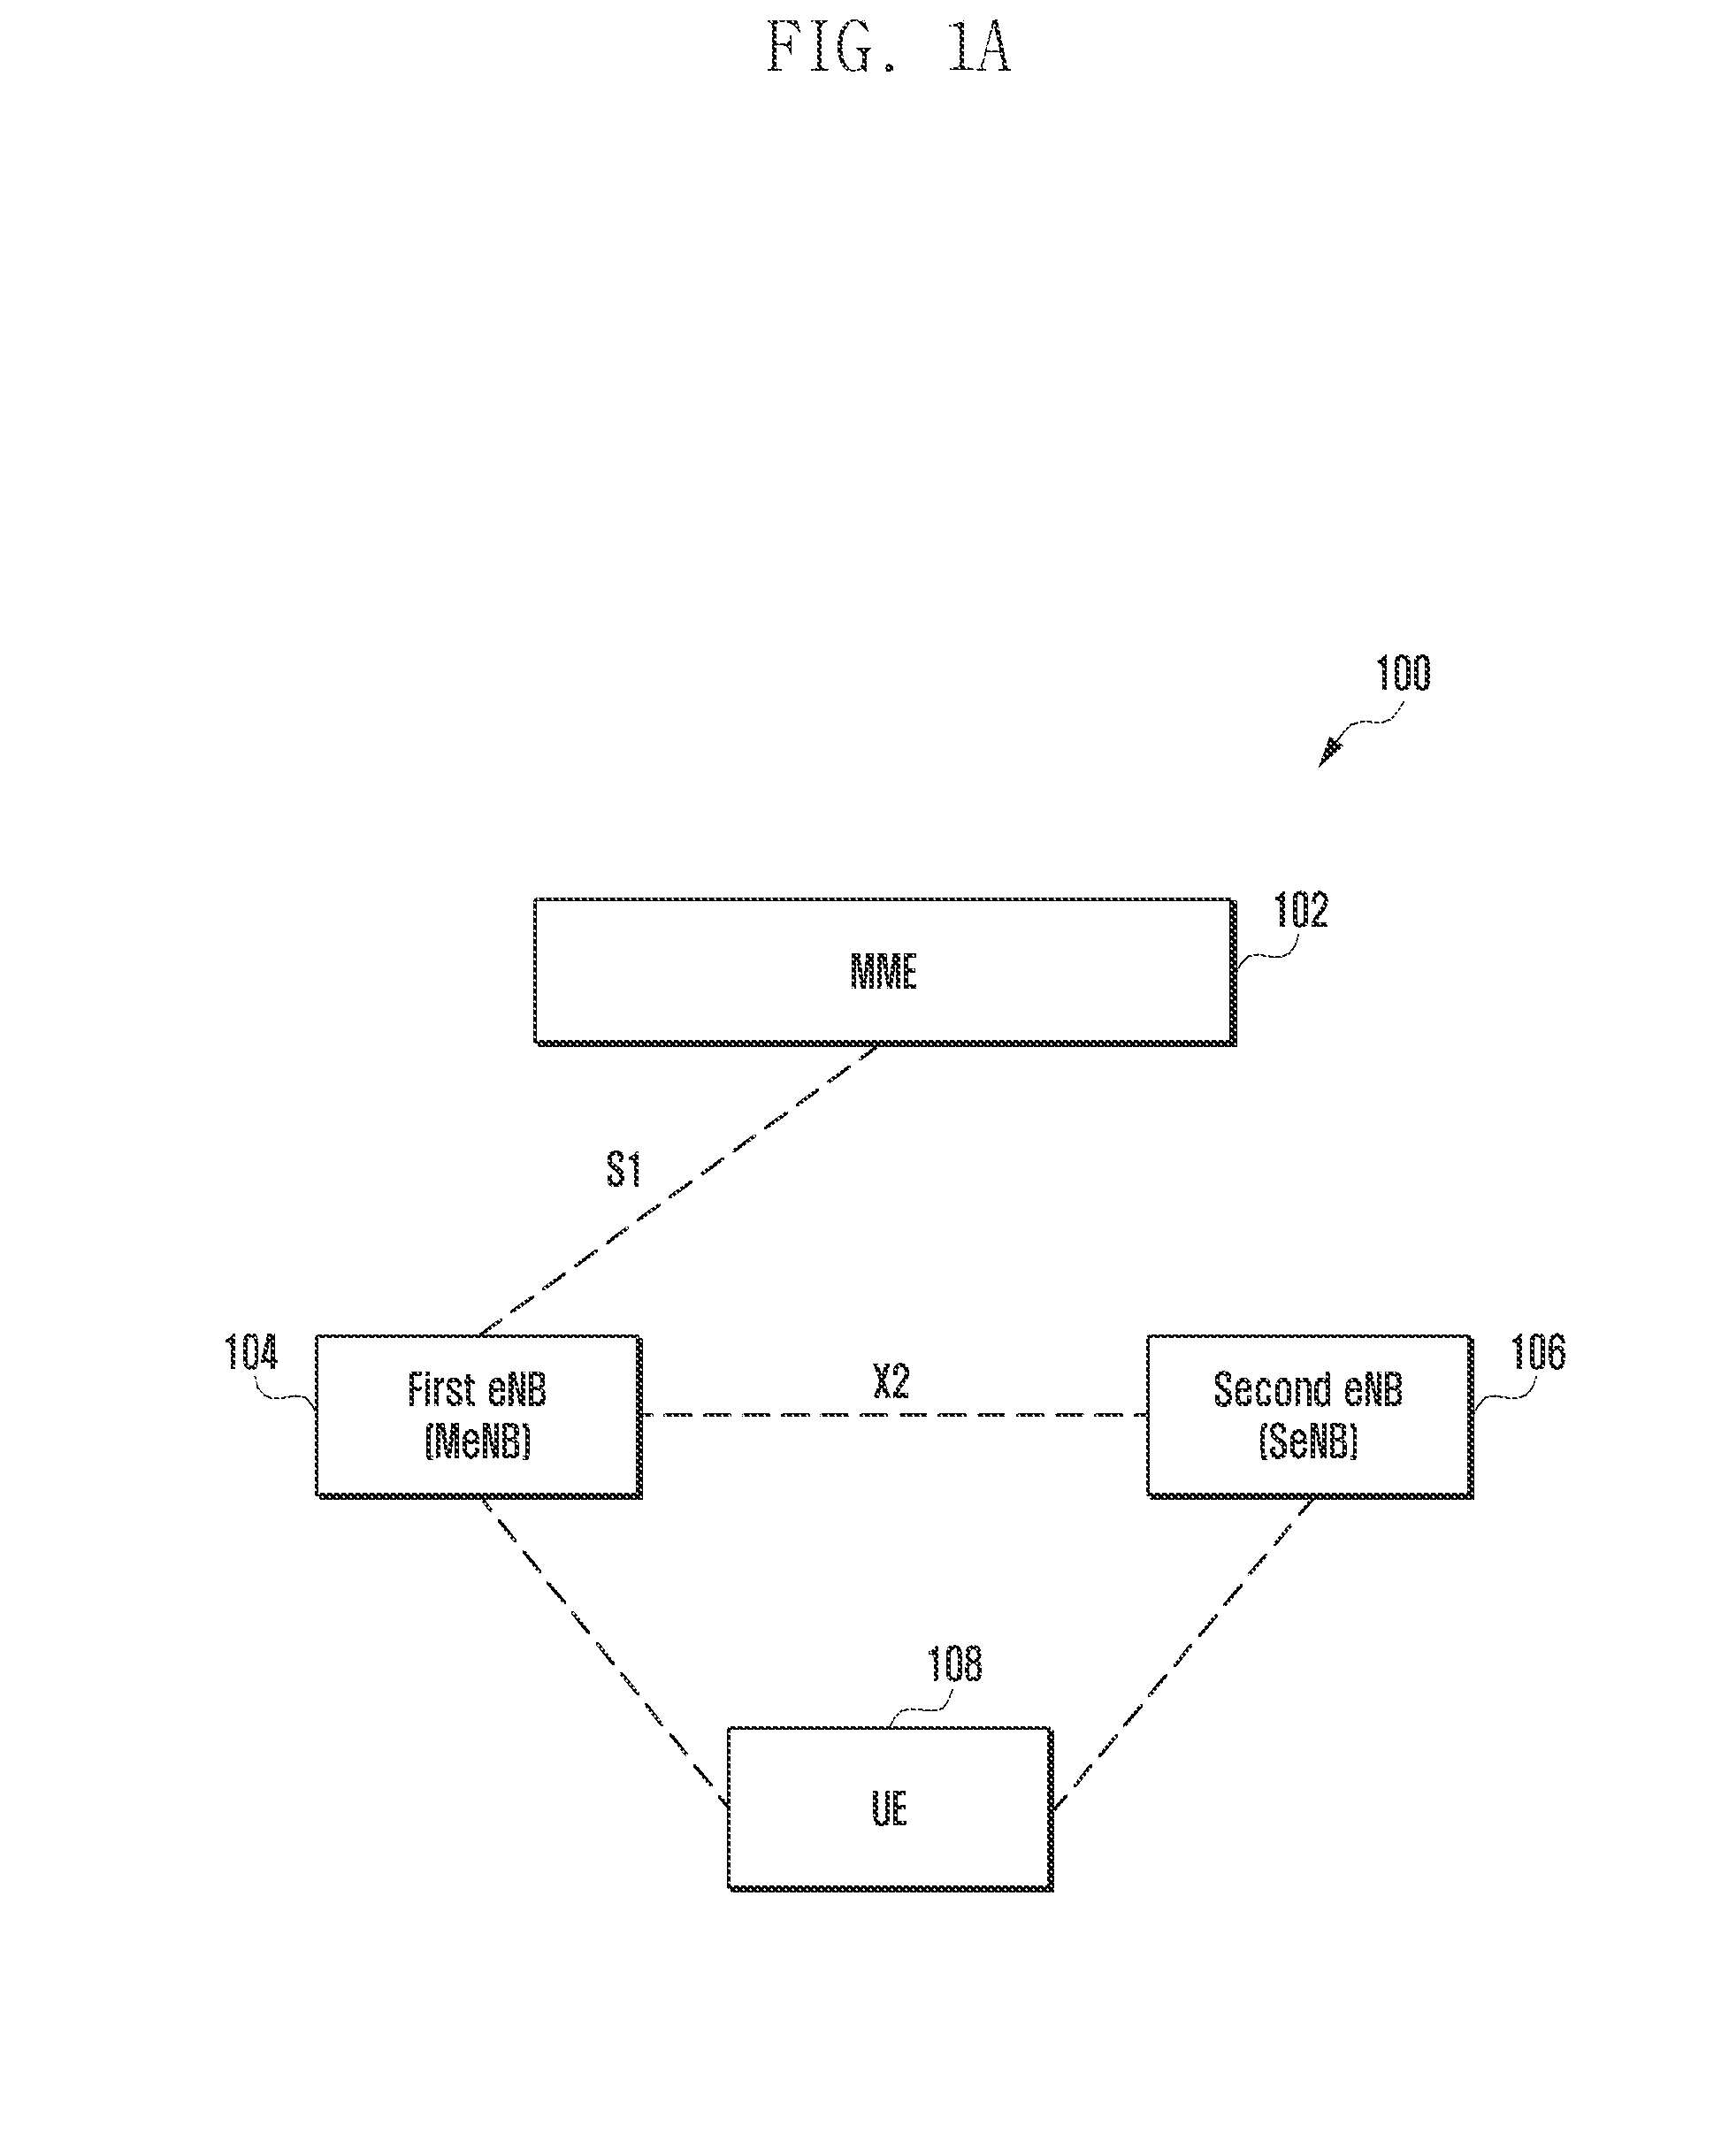 Method and system to enable secure communication for inter-enb transmission